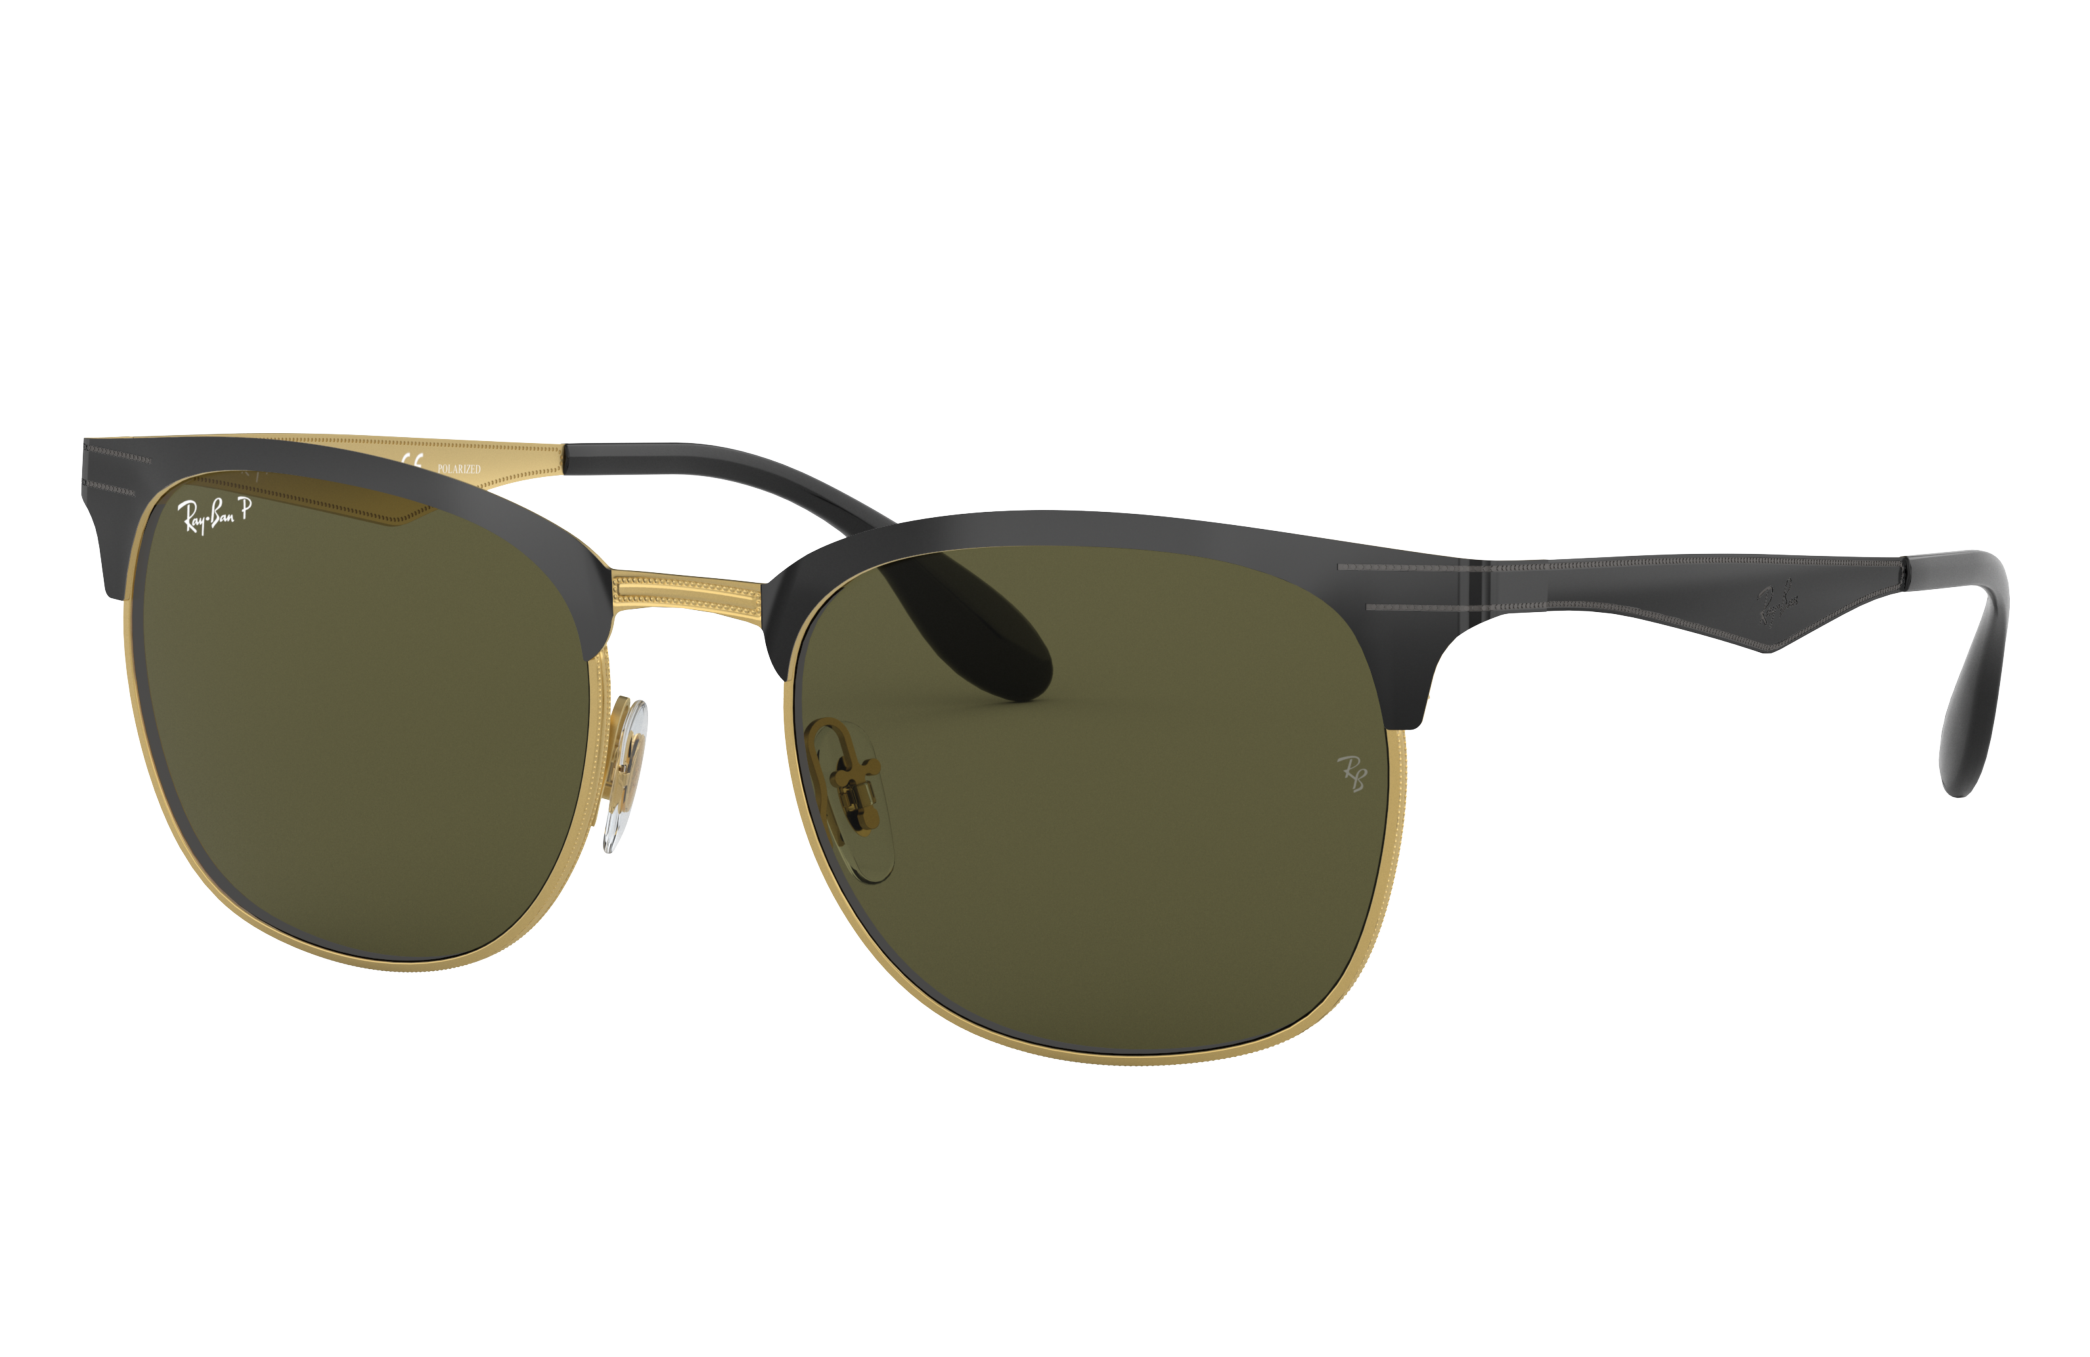 Rb3538 Sunglasses in Black On Gold and Green - RB3538 | Ray-Ban®